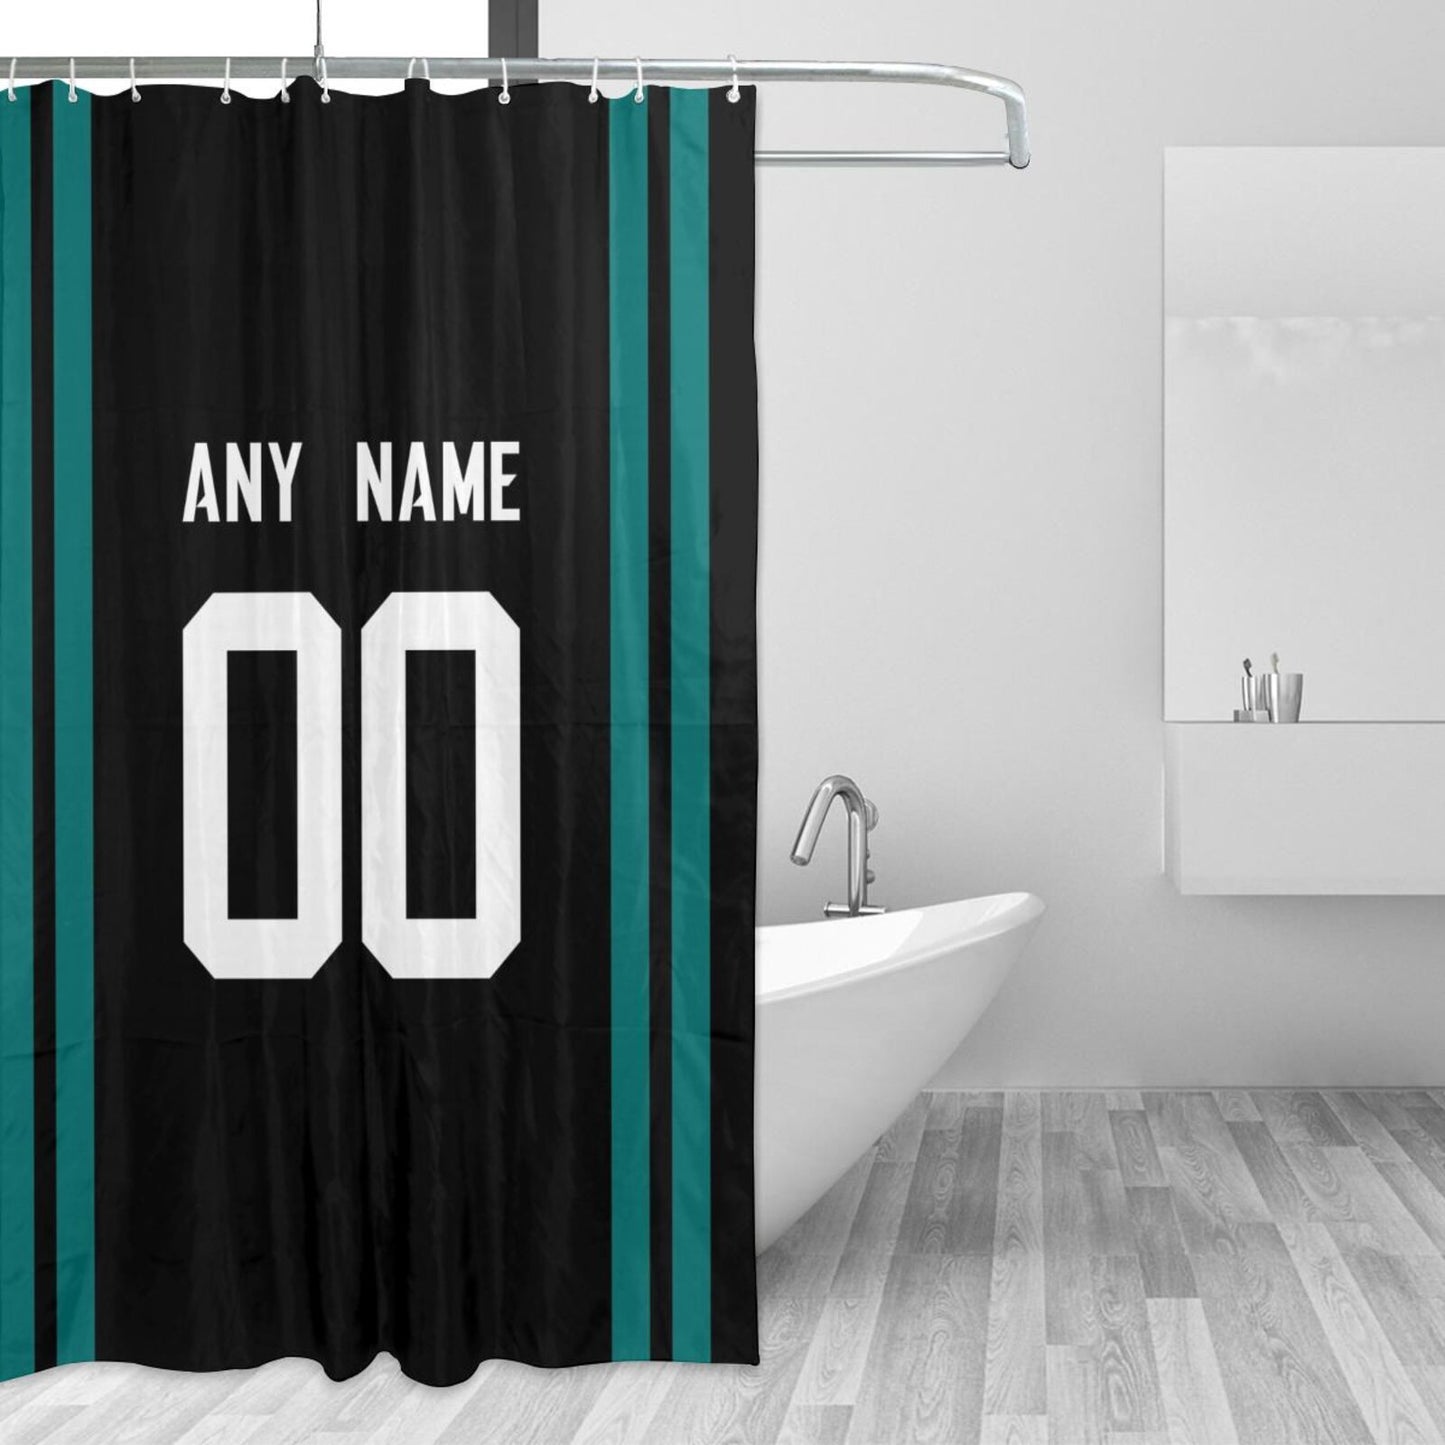 Custom Football Jacksonville Jaguars style personalized shower curtain custom design name and number set of 12 shower curtain hooks Rings